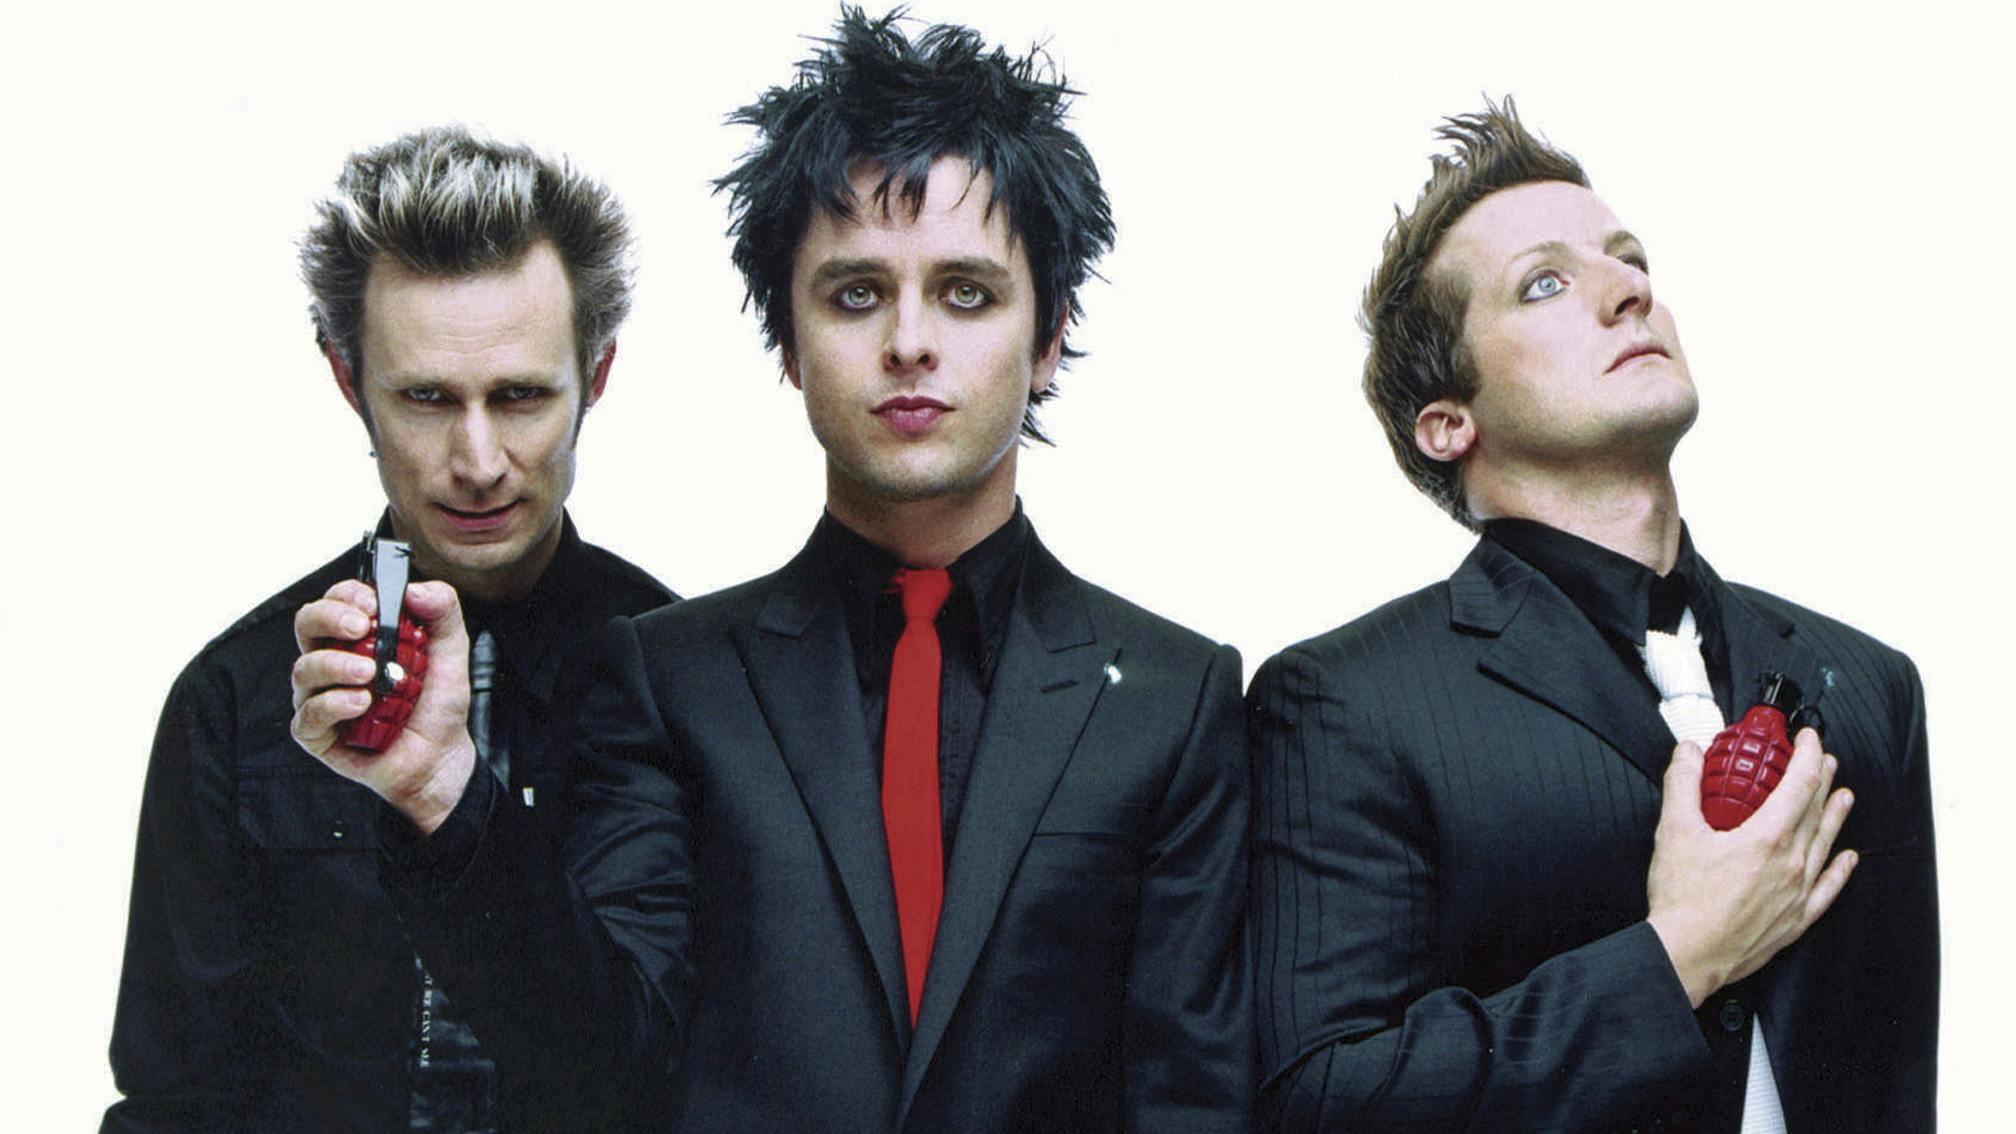 “It created a new future for us”: The story of Green Day’s American Idiot